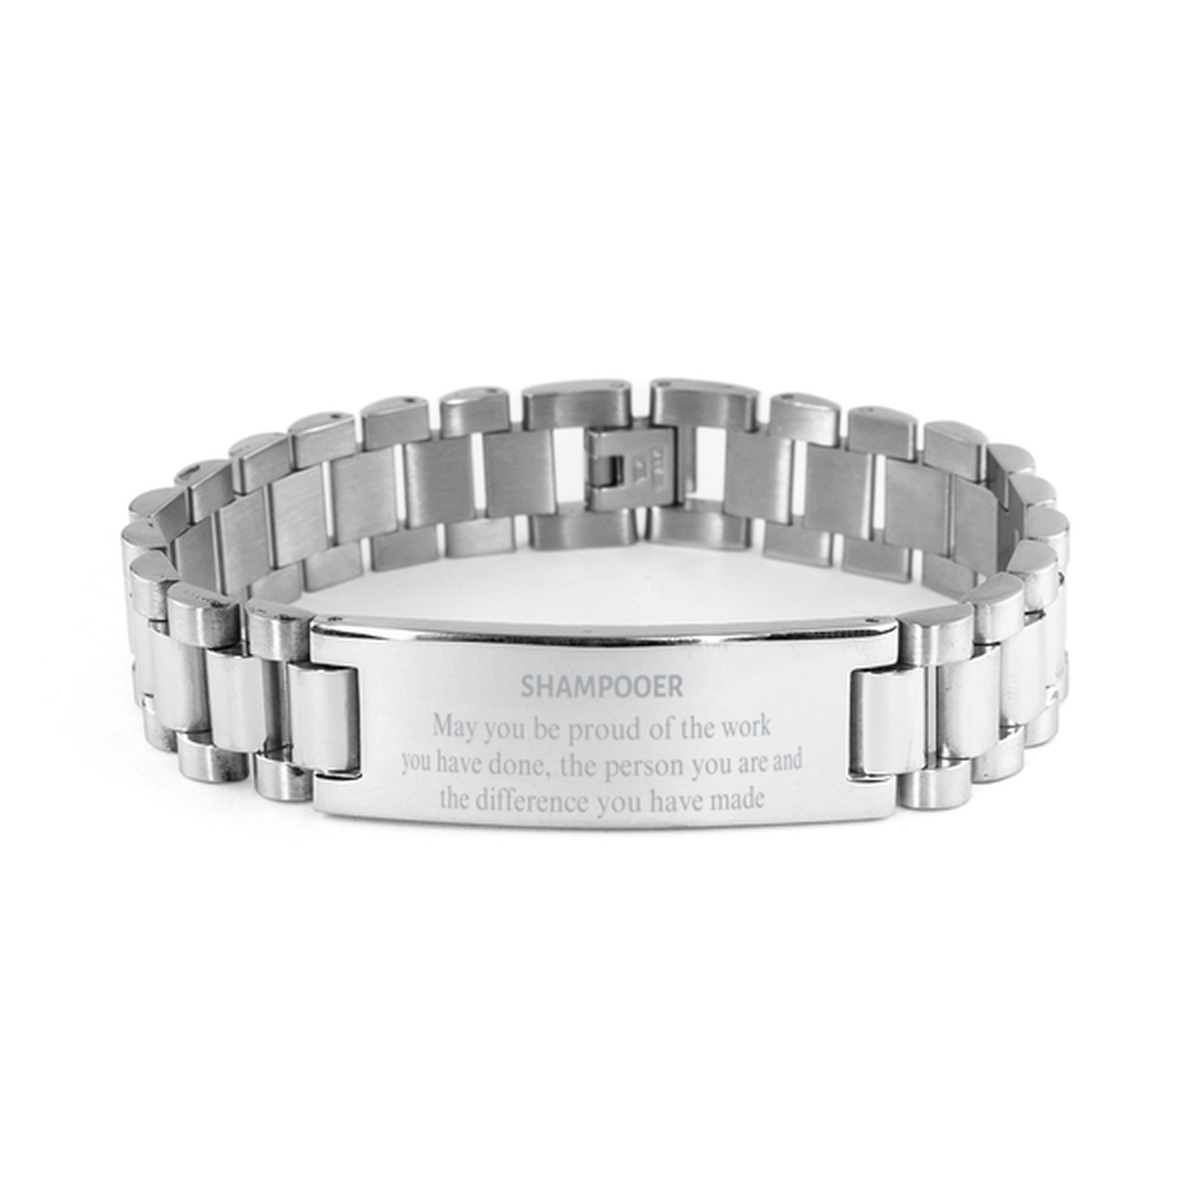 Shampooer May you be proud of the work you have done, Retirement Shampooer Ladder Stainless Steel Bracelet for Colleague Appreciation Gifts Amazing for Shampooer